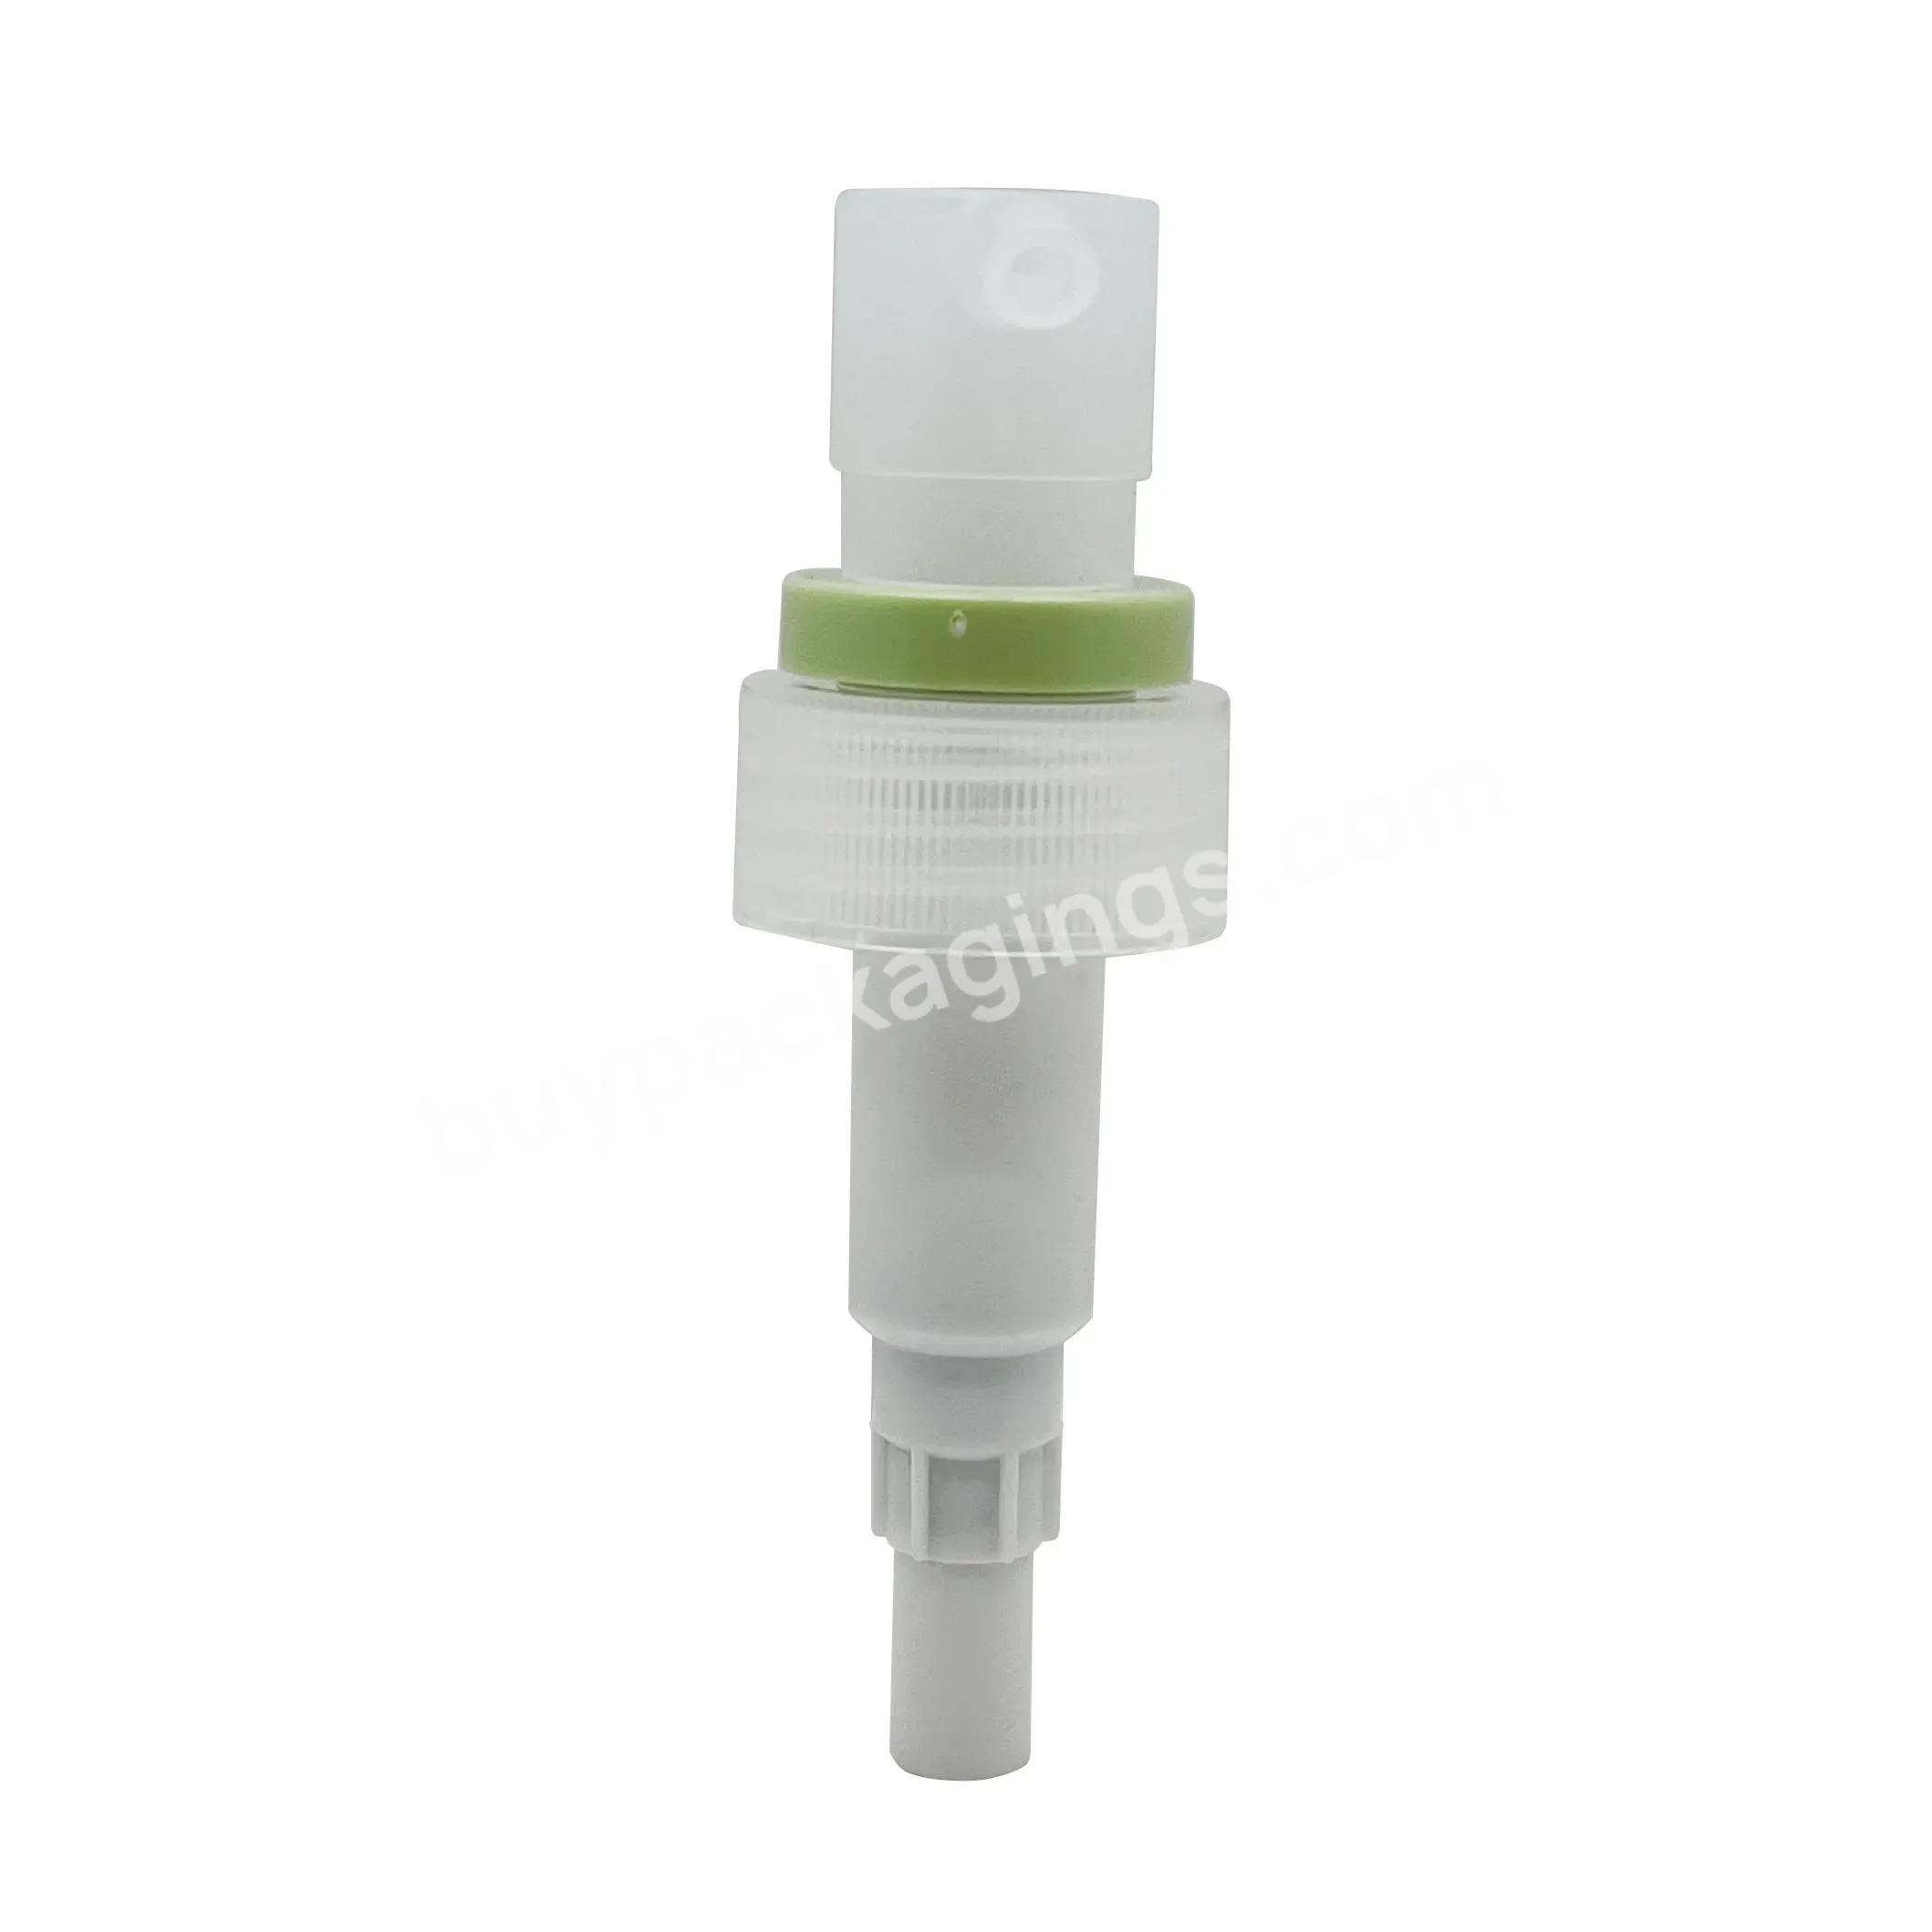 Disinfection Hand Sanitizer Pressure Type Travel Sub Package Spiral Emulsion Pump 28/410 - Buy Exquisitely Designed Pump Head,Press Easy Pump Head,Press Type Lotion Pump Head.